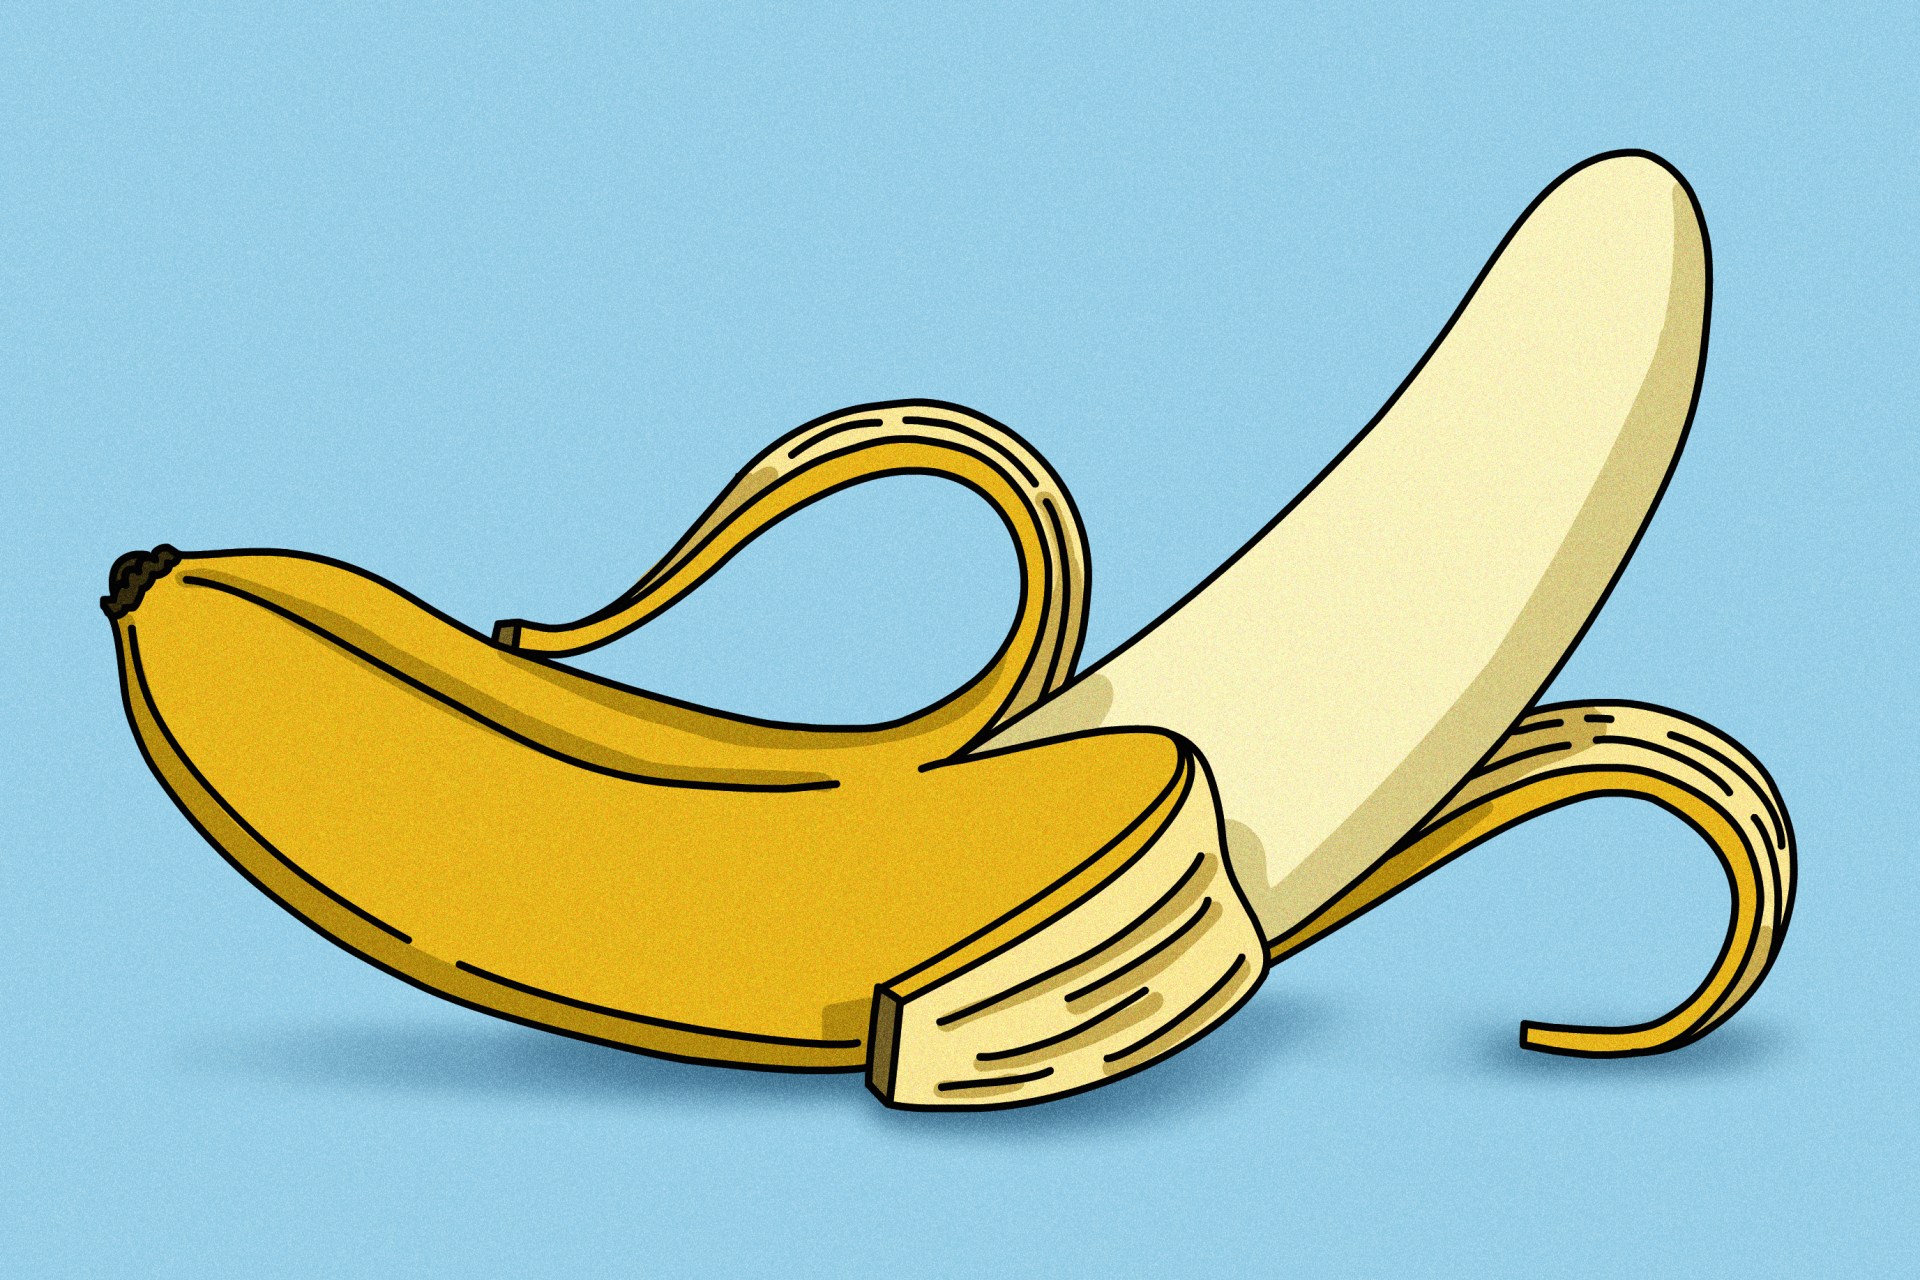 Self Sex Lady By Banana - 40 Banana Puns That Will Make You Burst With Sidesplitting Laughter |  Thought Catalog